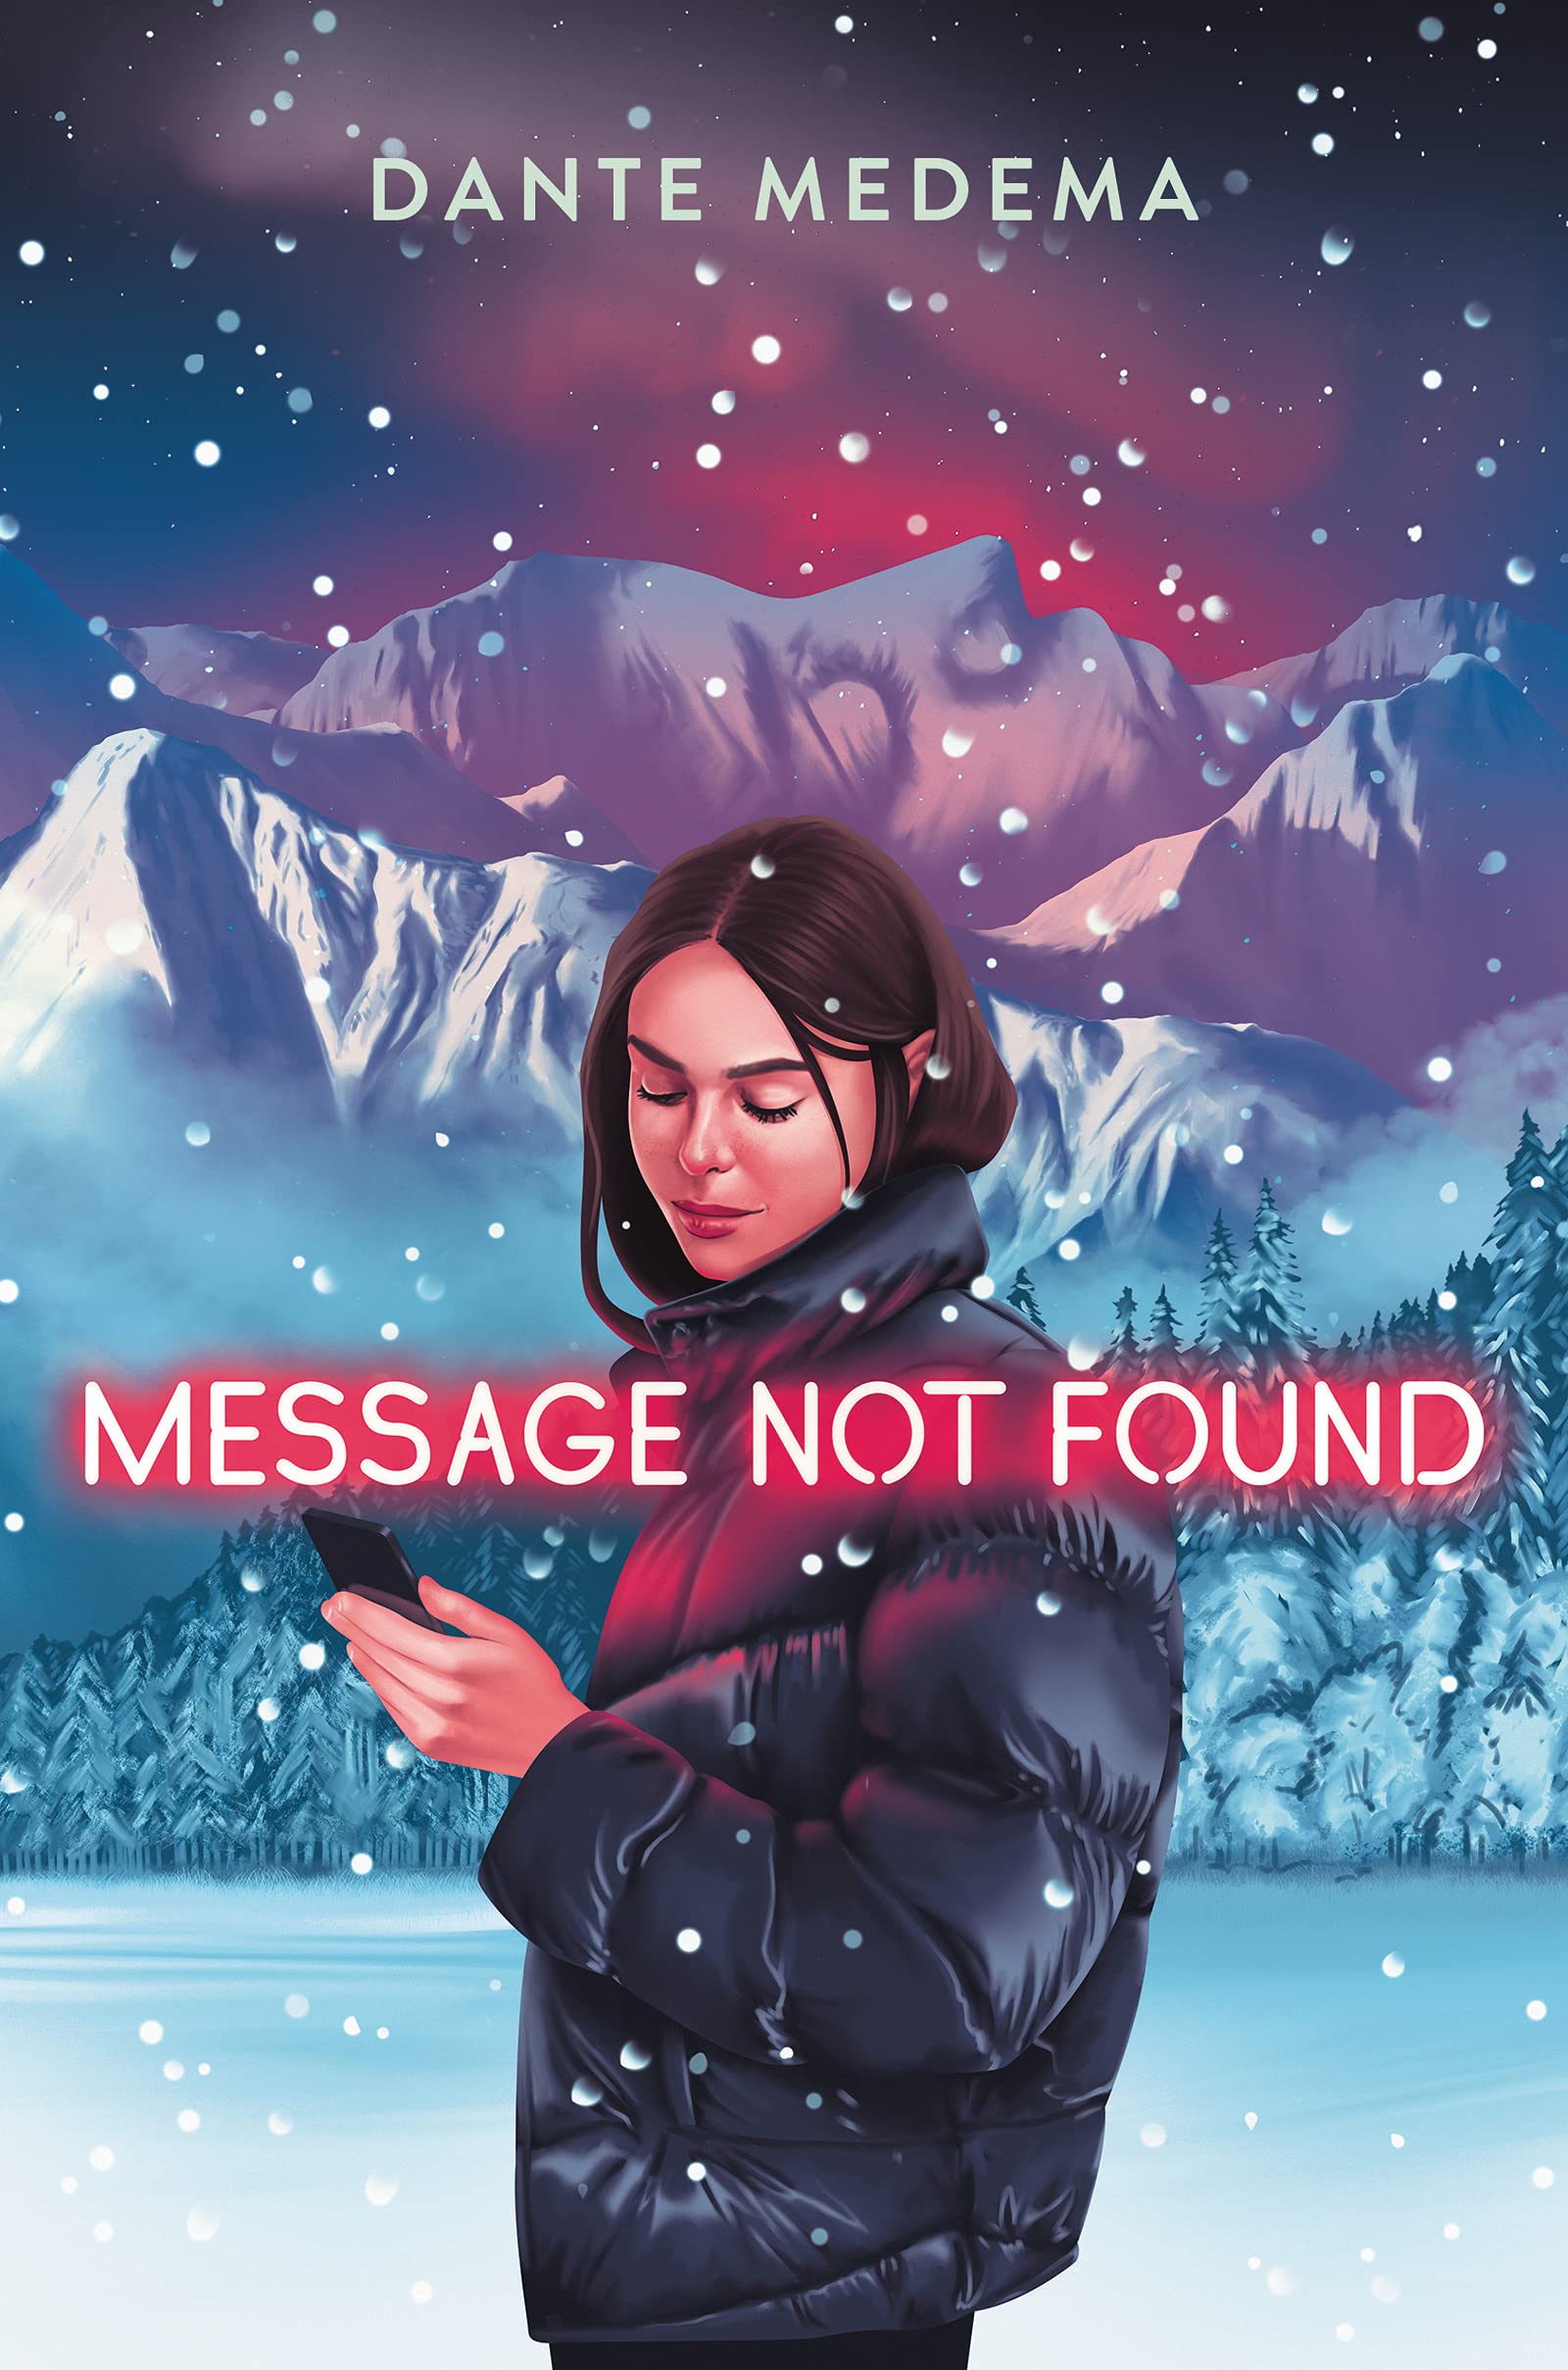 Cover of “Message Not Found” by Dante Medema